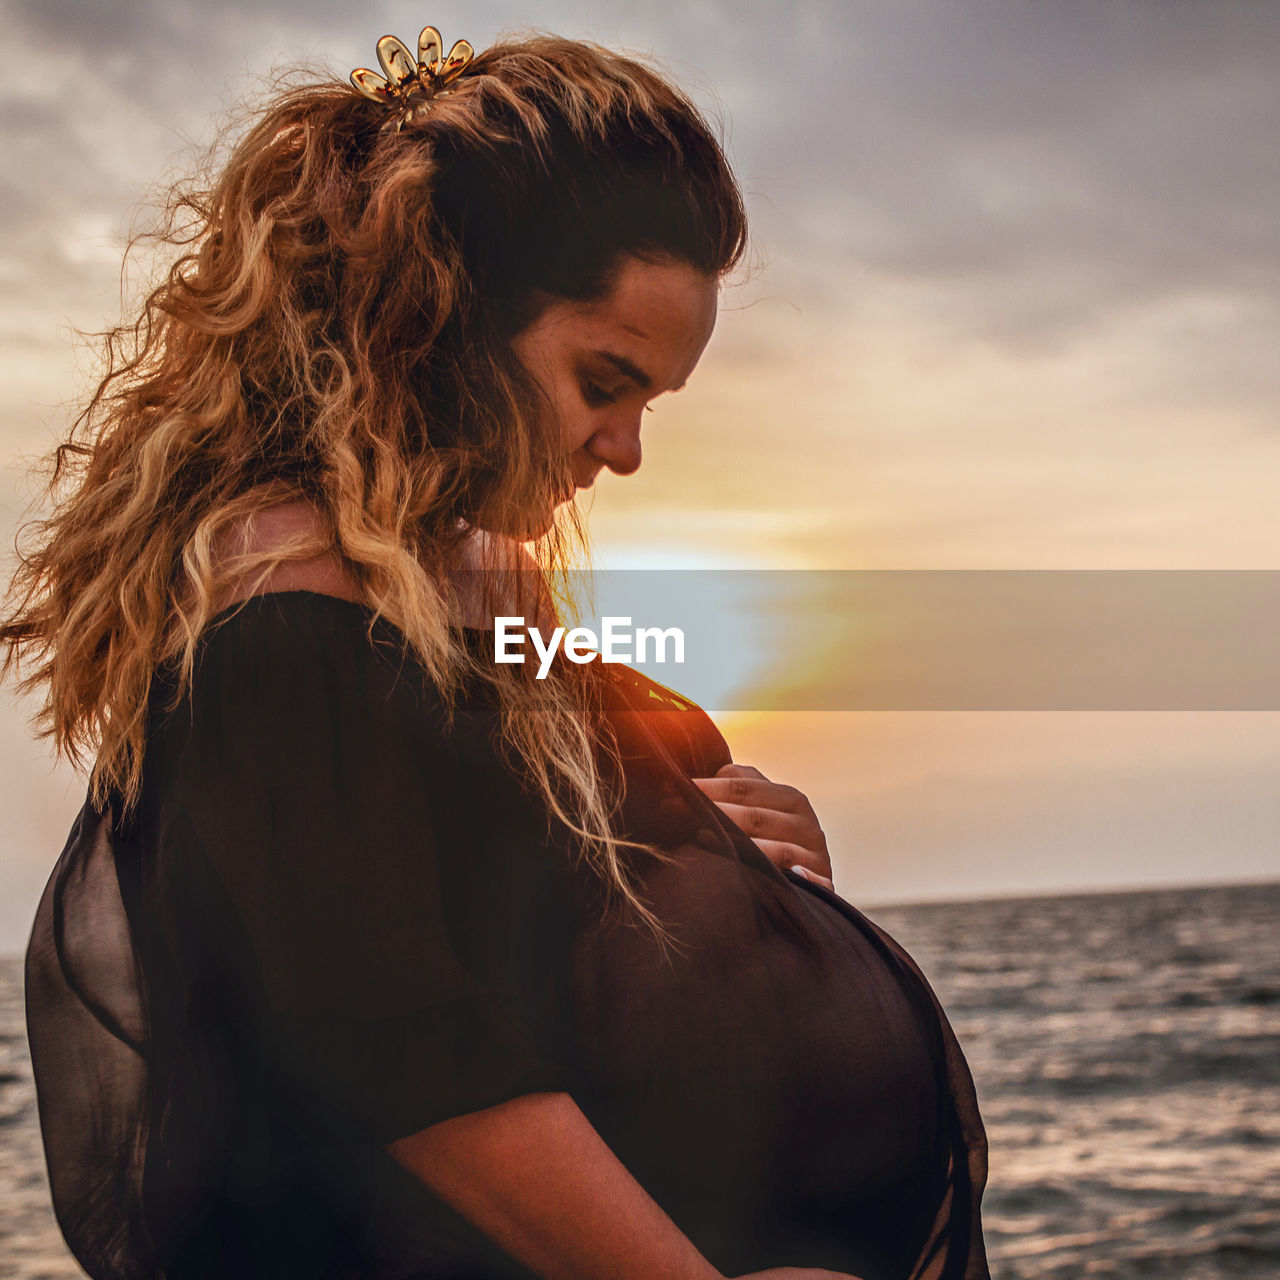 Pregnant woman on beach against sky during sunset